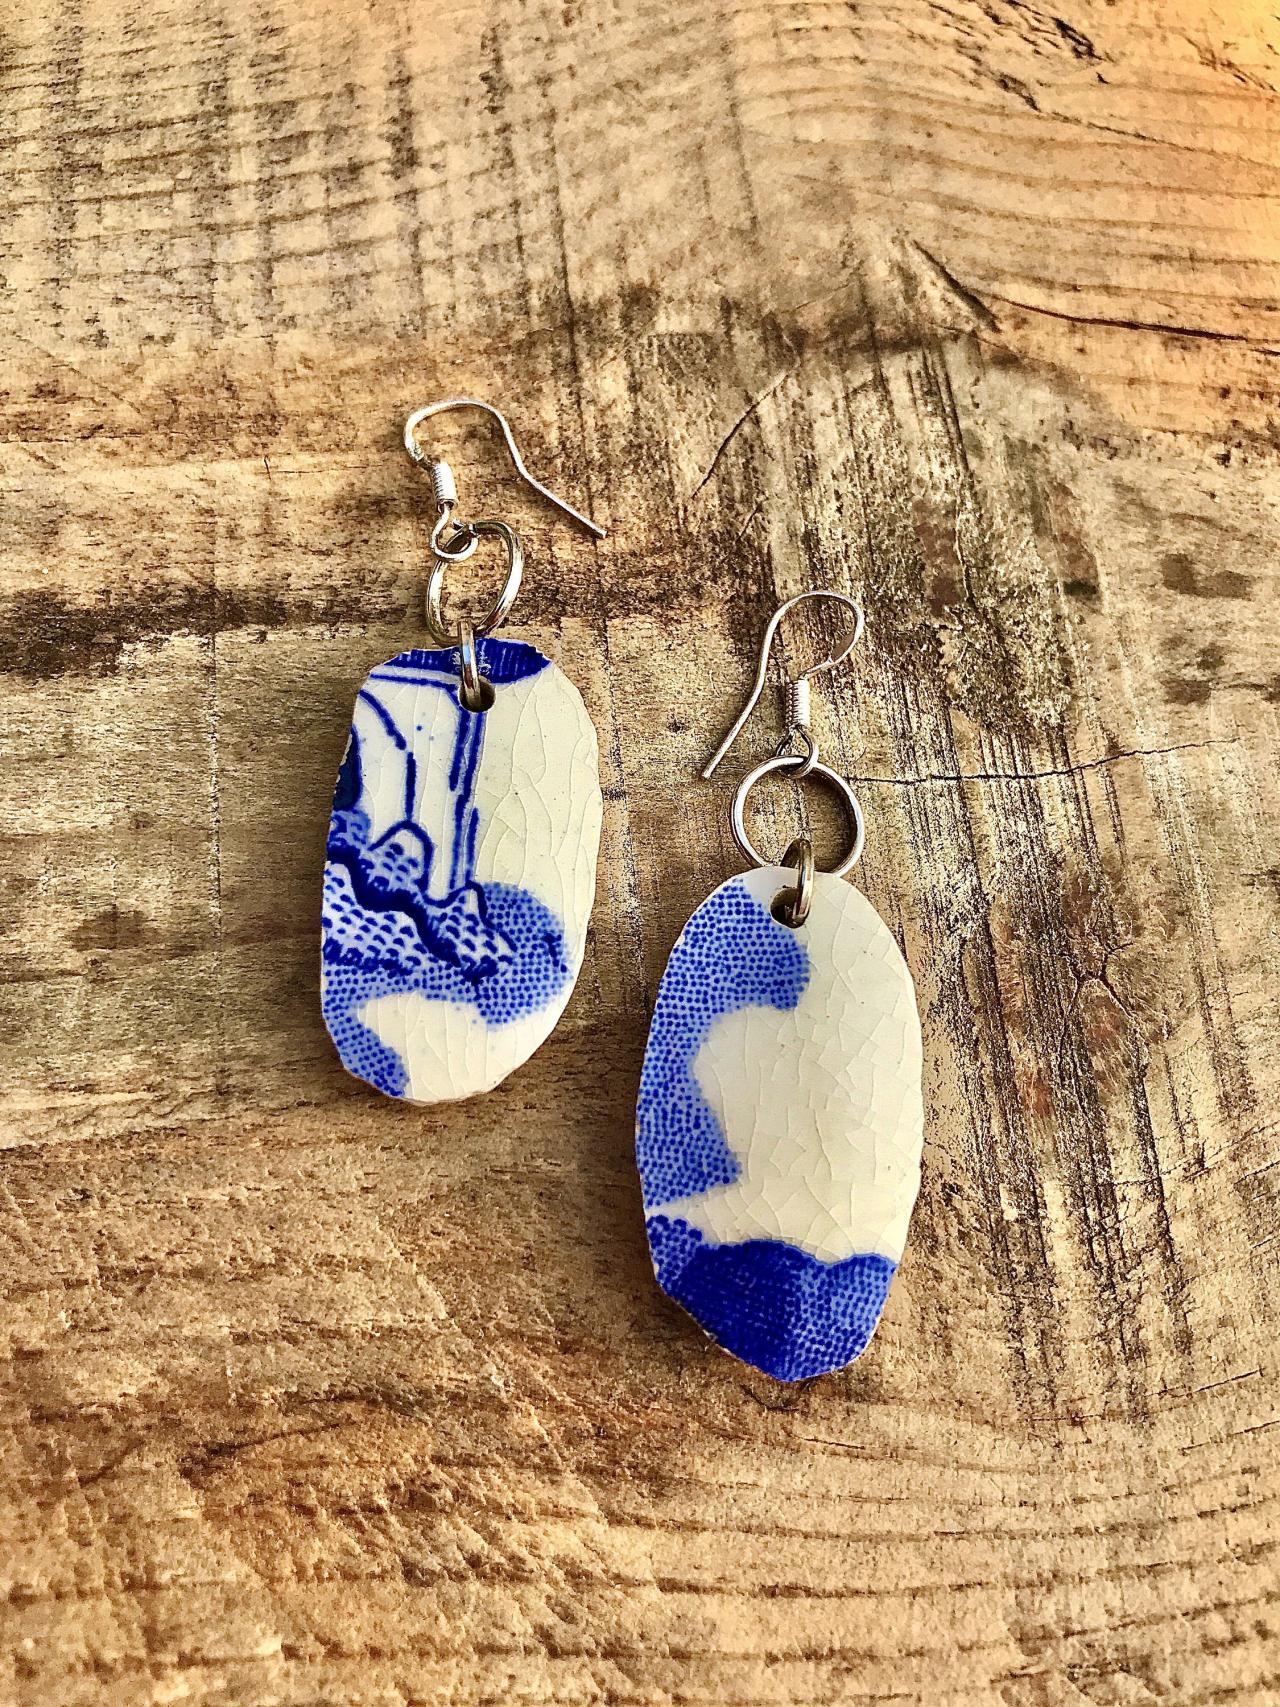 Sweet vintage willow pattern blue & wHITE china earrings